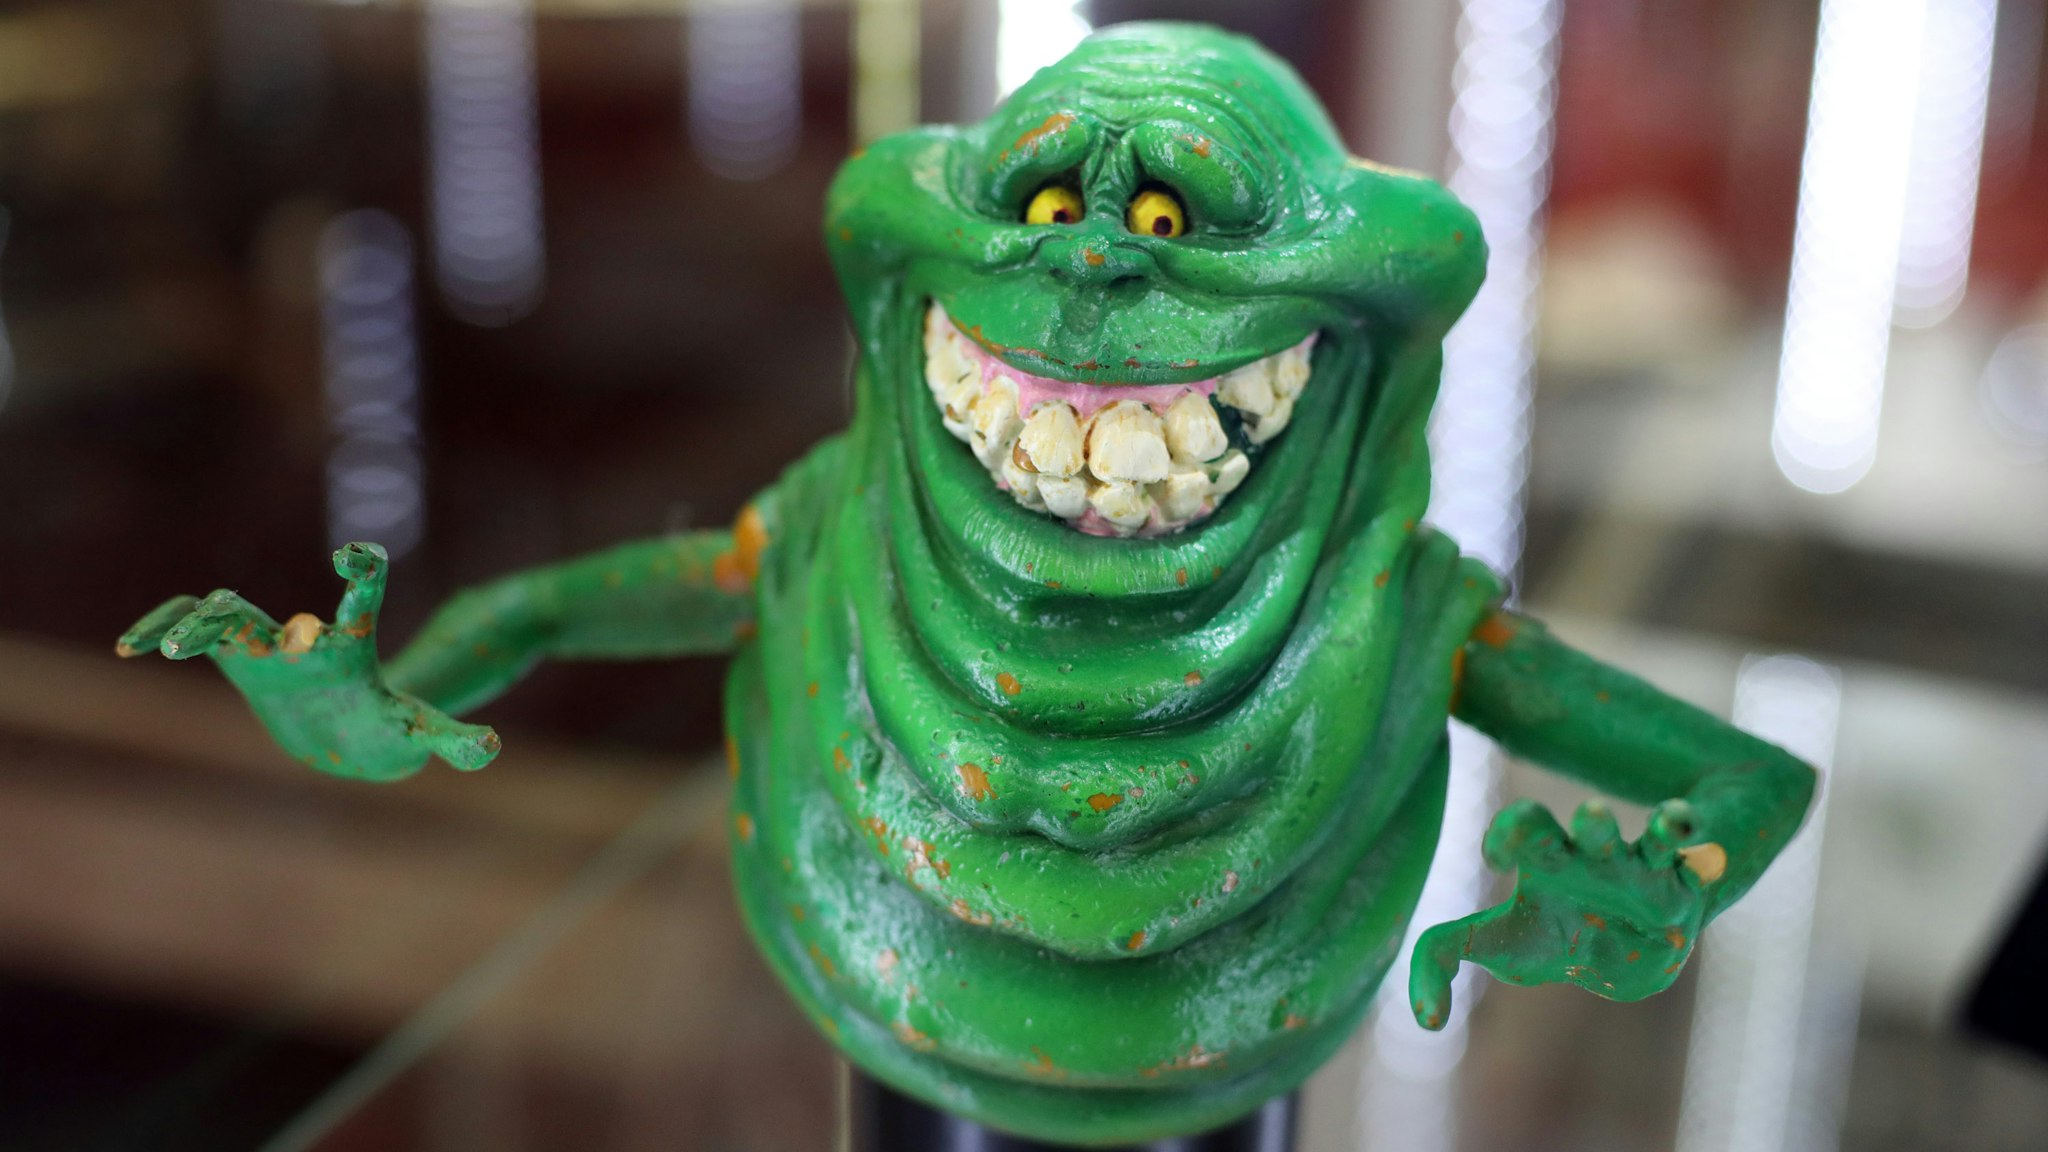 LONDON, ENGLAND - SEPTEMBER 06: Slimer from Ghostbusters seen during the TV Memorabilia Auction preview Photocall at BFI IMAX on September 6, 2018 in London, England. The exhibition features over 270 rare and iconic props and costumes from the world of film and television. All items will be sold in the upcoming Prop Store Live Auction (Photo by Mike Marsland/Mike Marsland/WireImage)